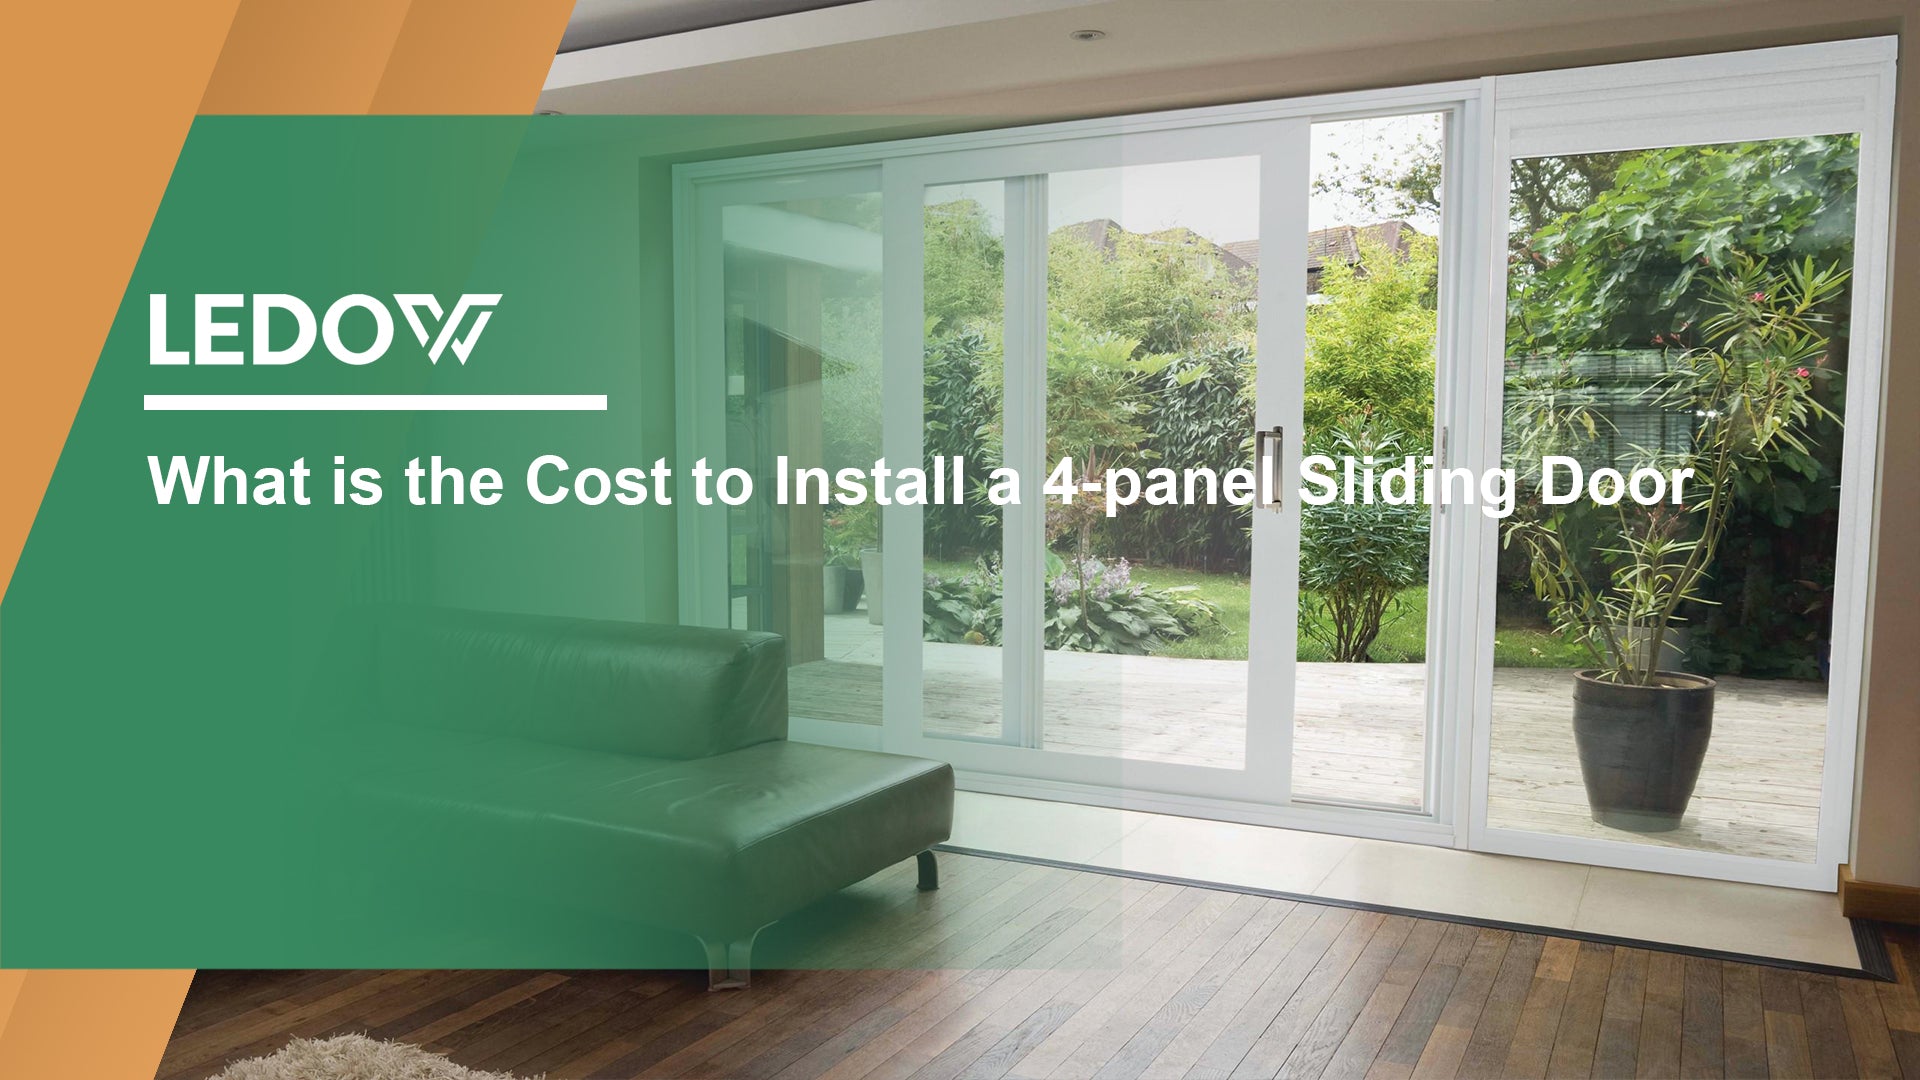 What is the Cost to Install a 4-panel Sliding Door